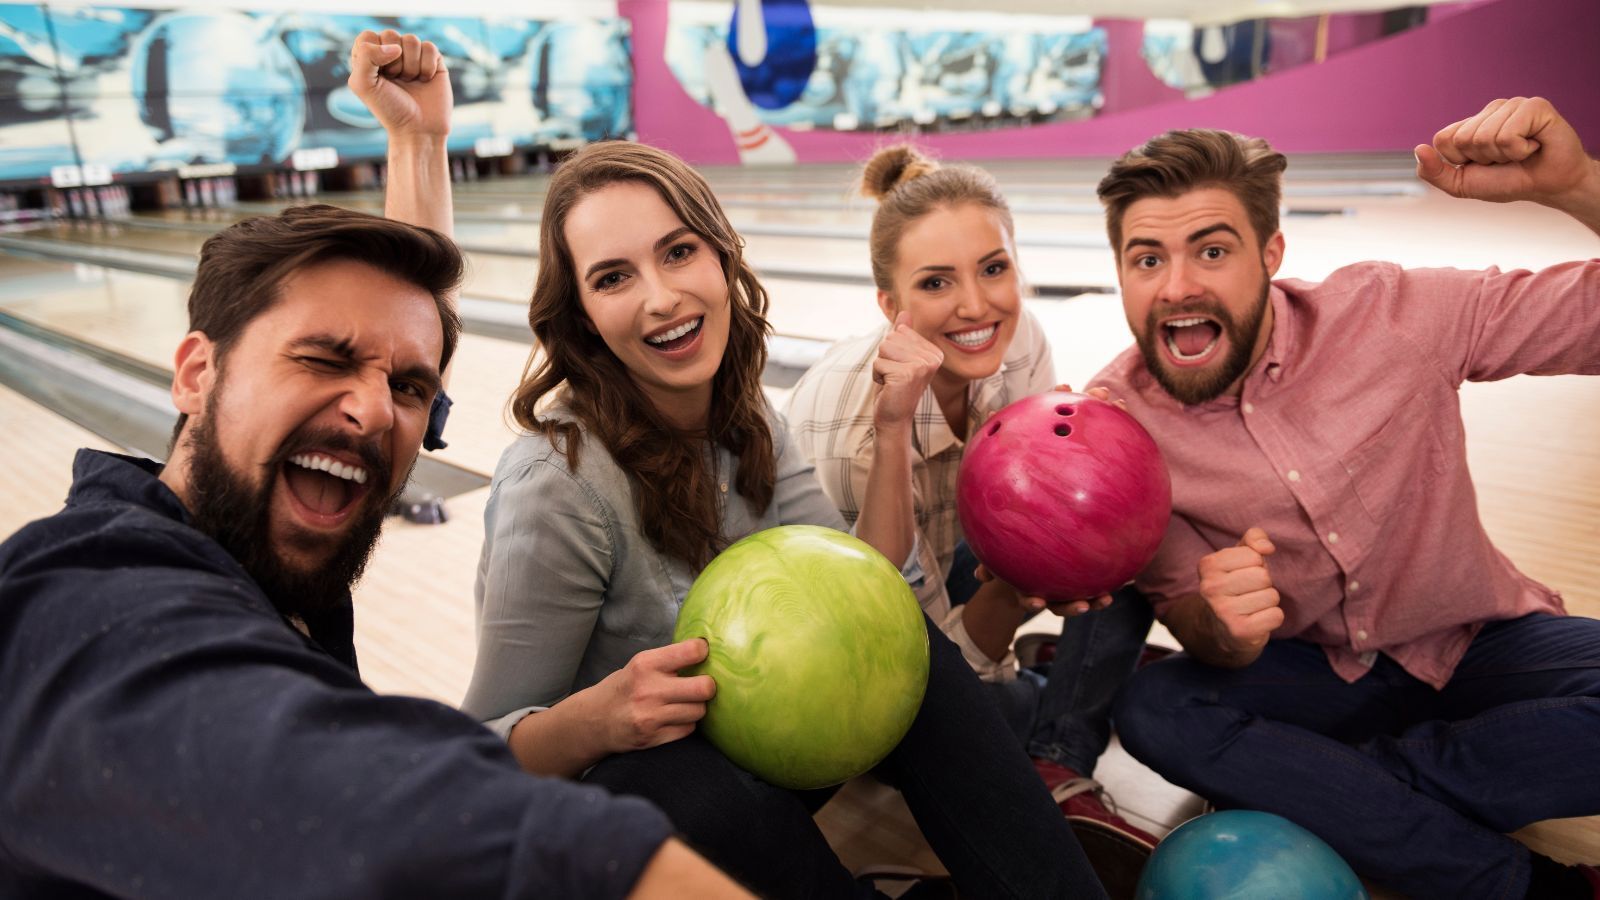 How Many People Cav Bowl In One Lane? Tips for Groups